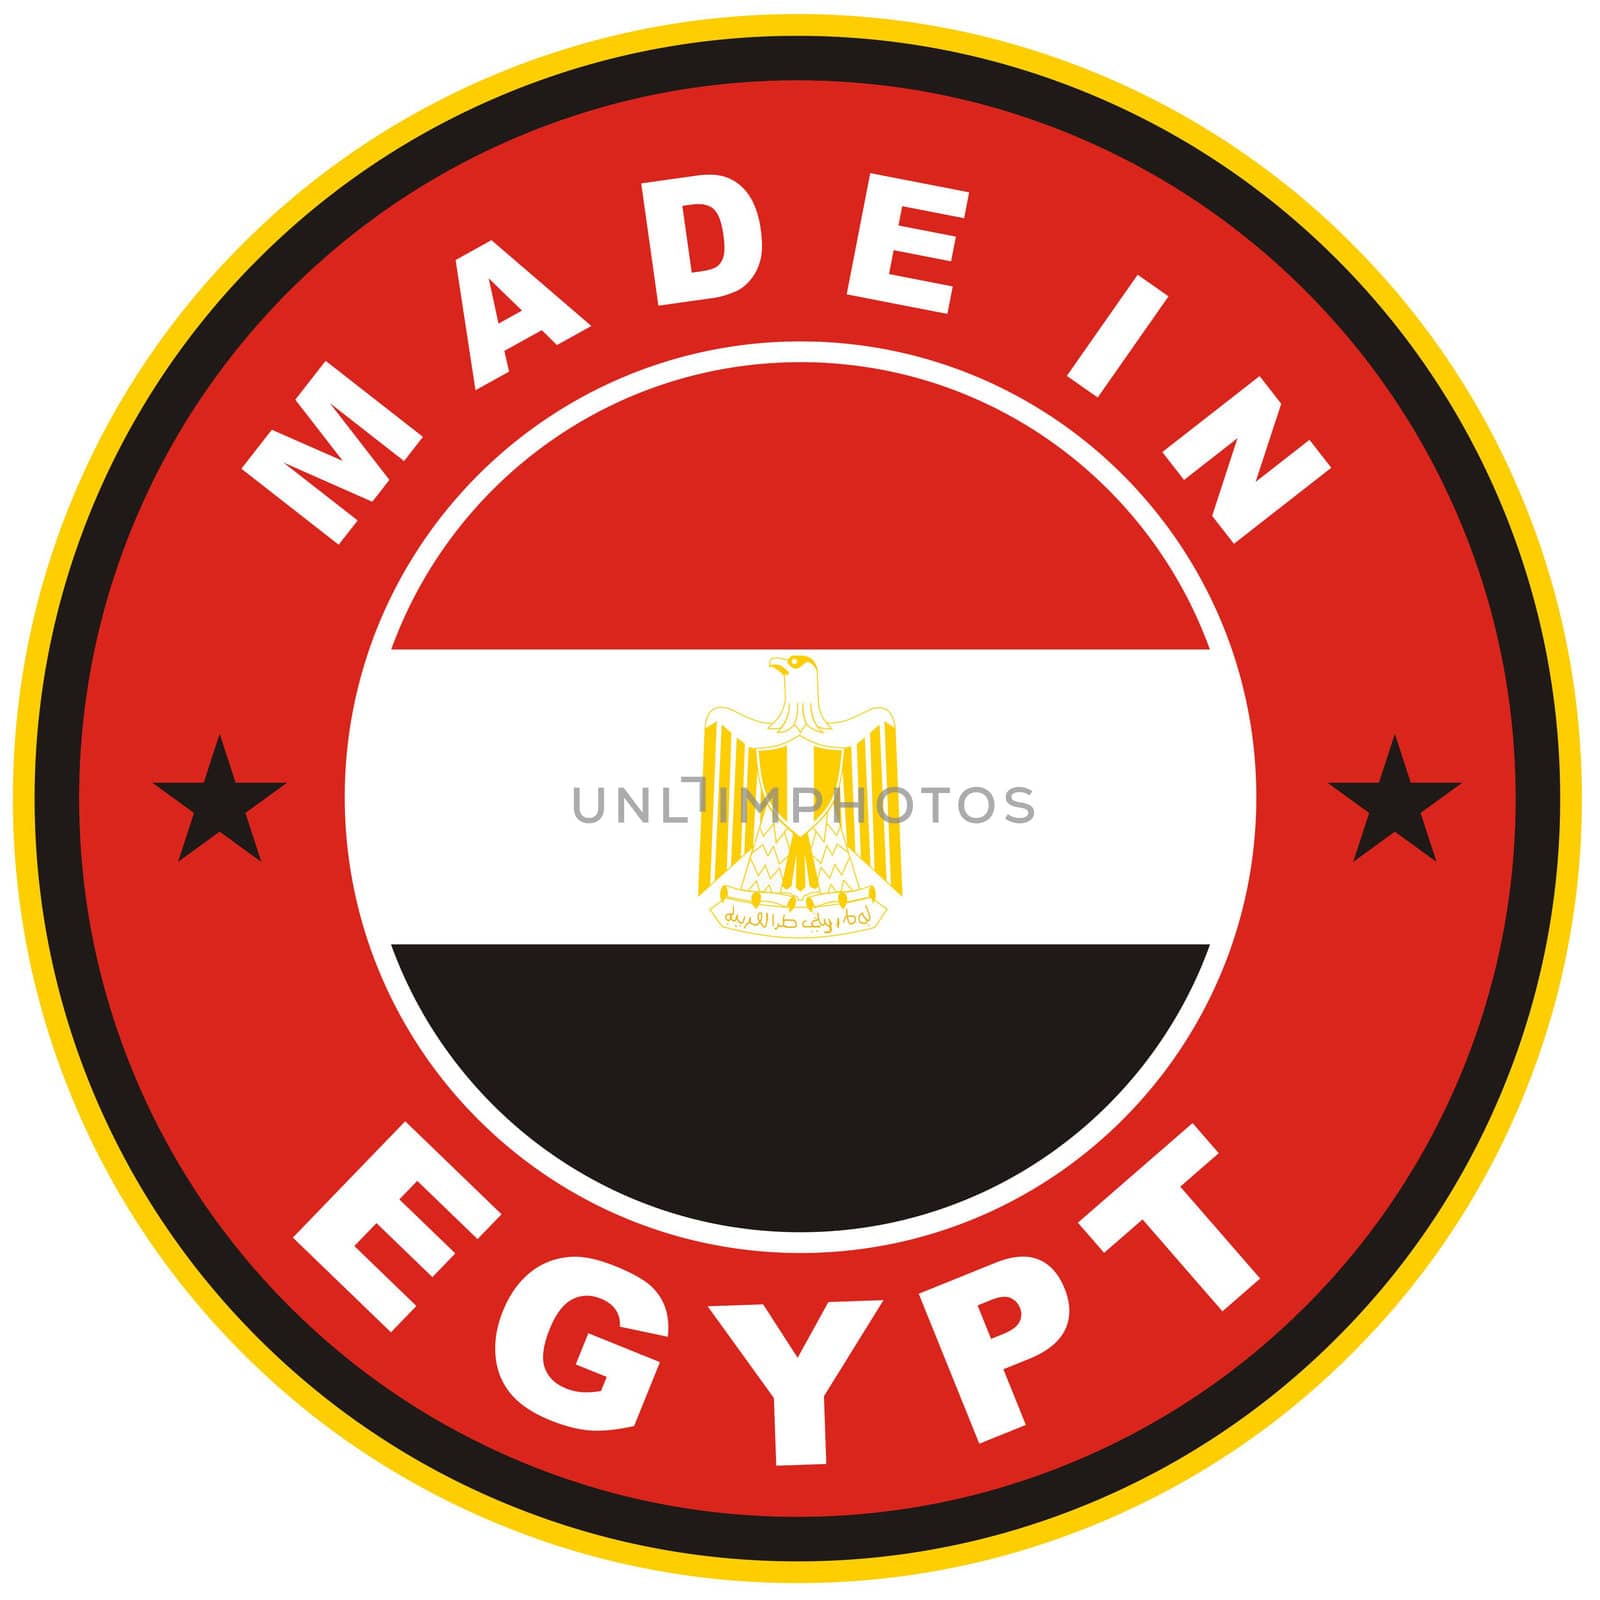 made in egypt by tony4urban